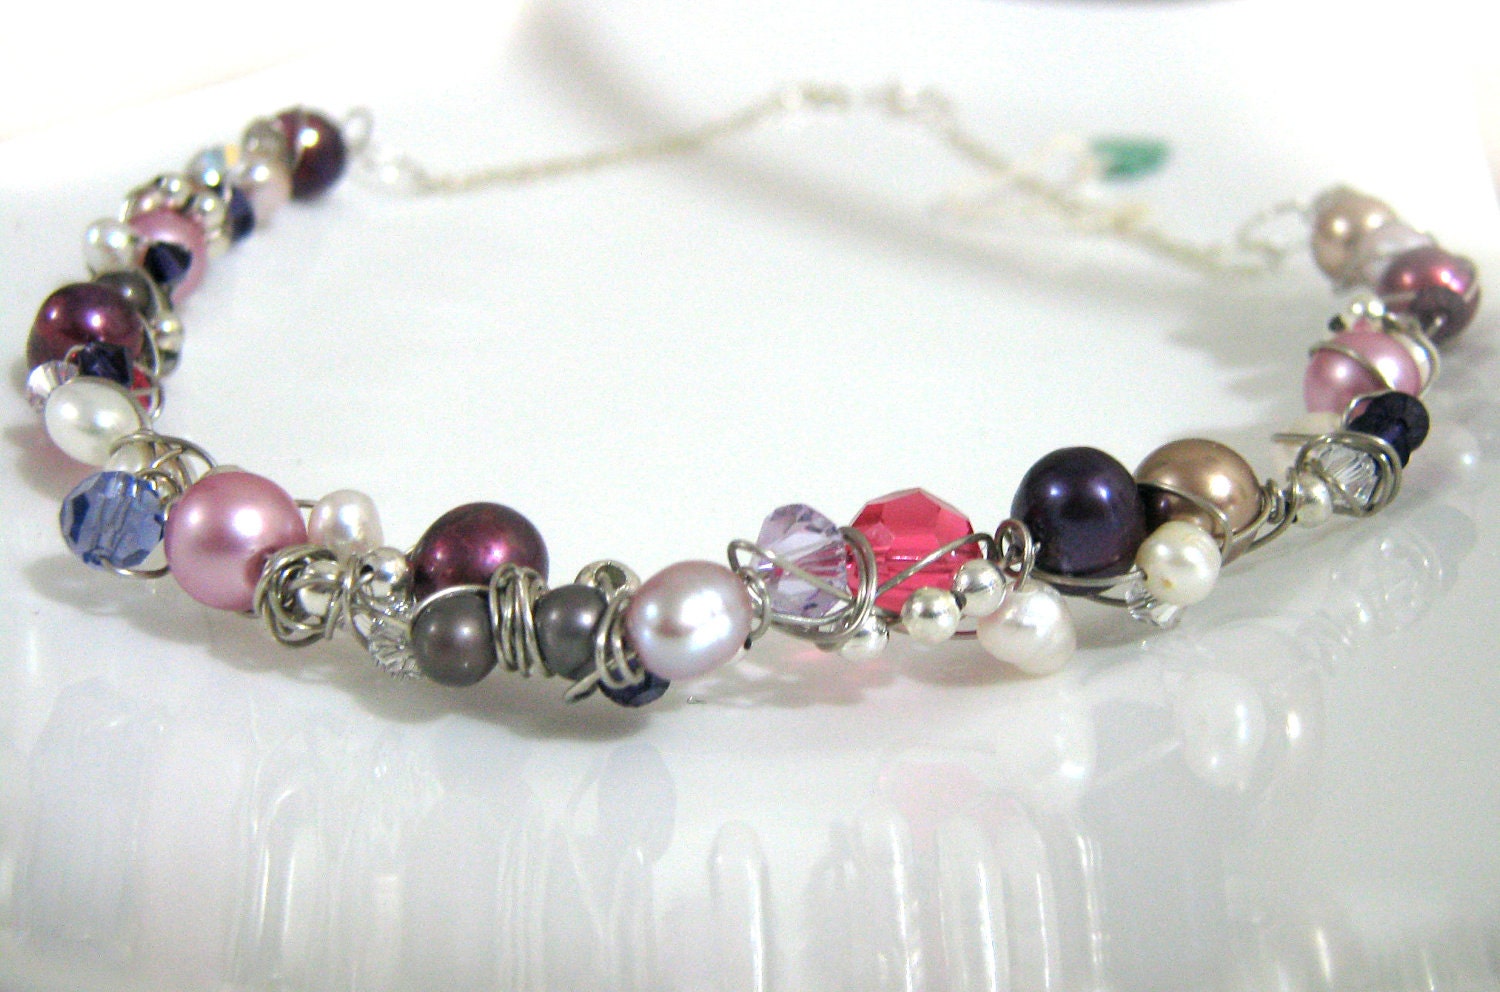 Ooak wire wrapped necklace - Grapevine - purple and pink - freshwater pearl and crystal